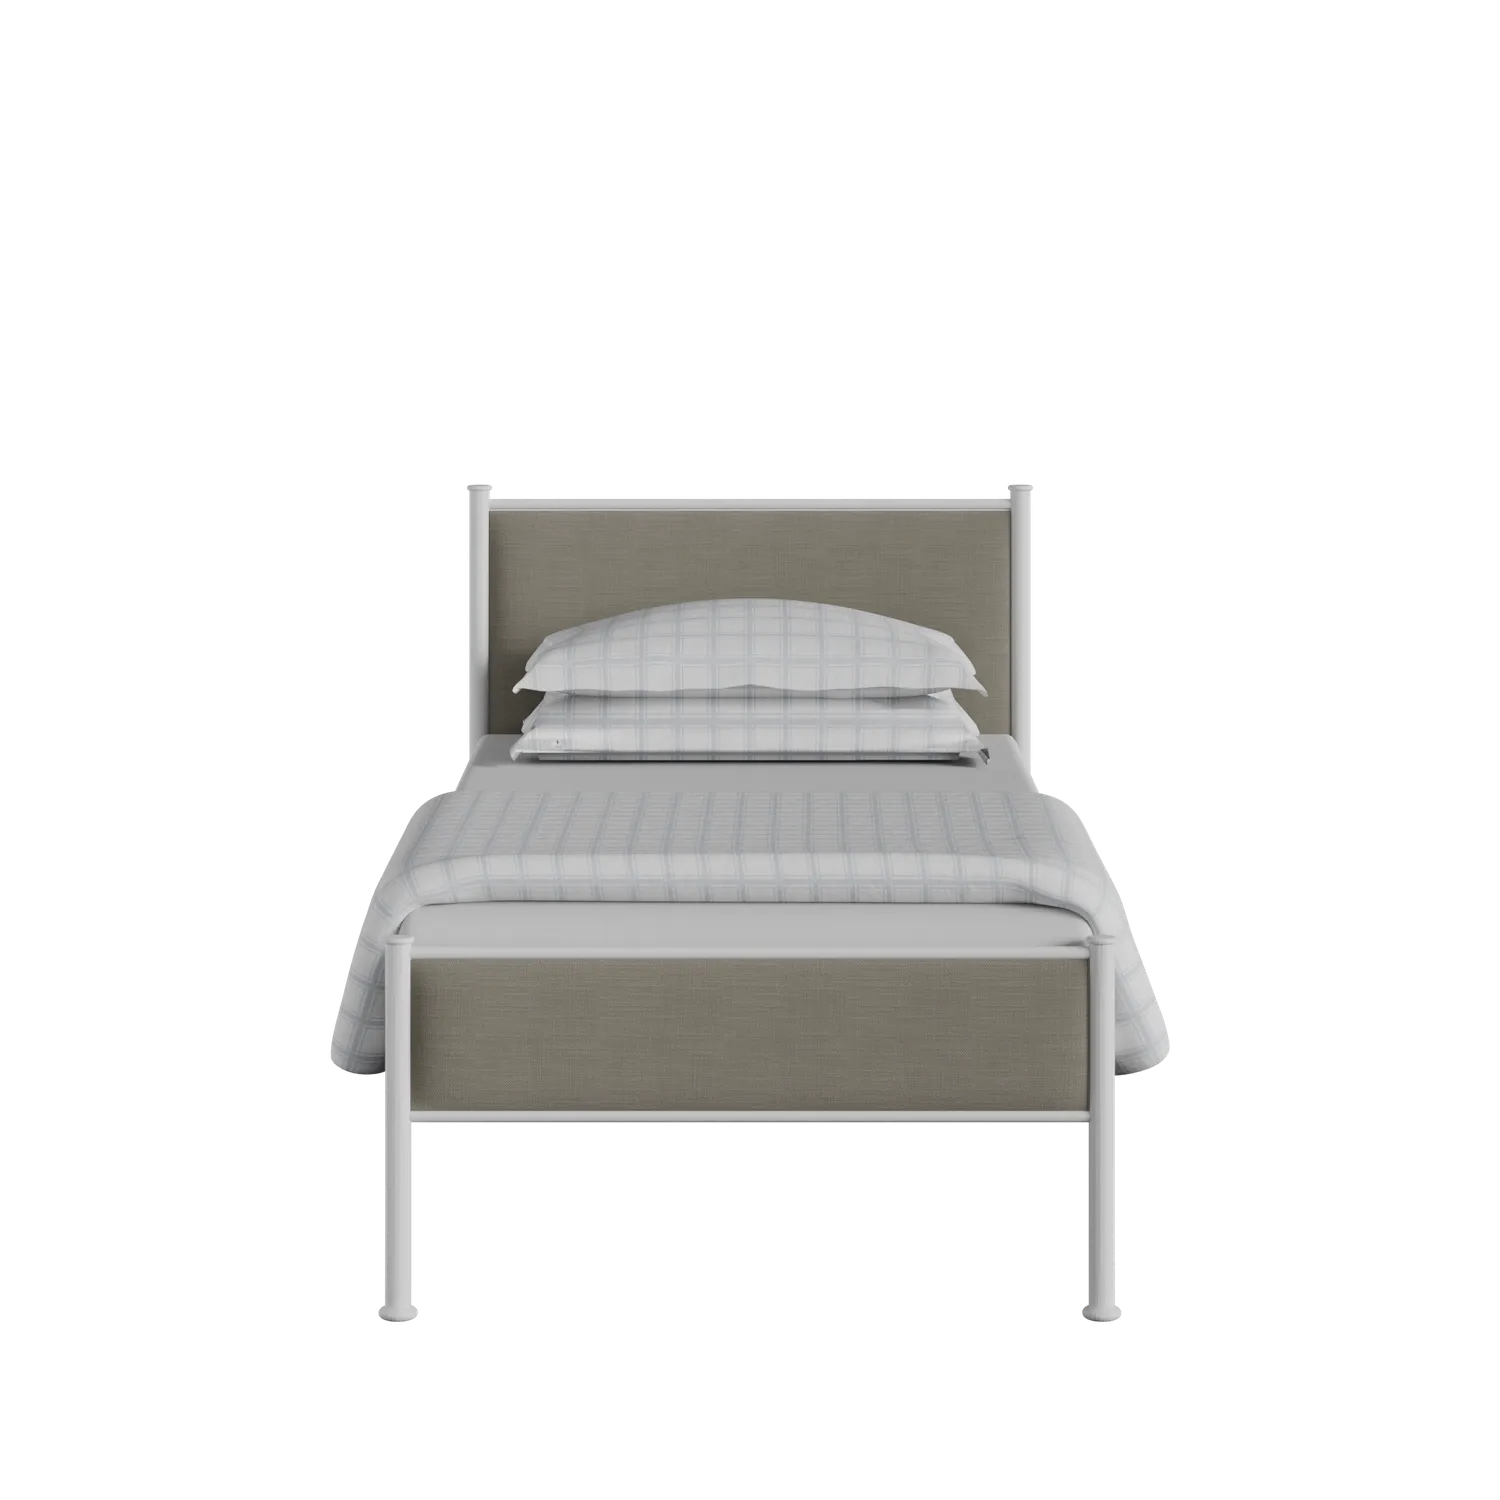 Brest iron/metal single bed in white